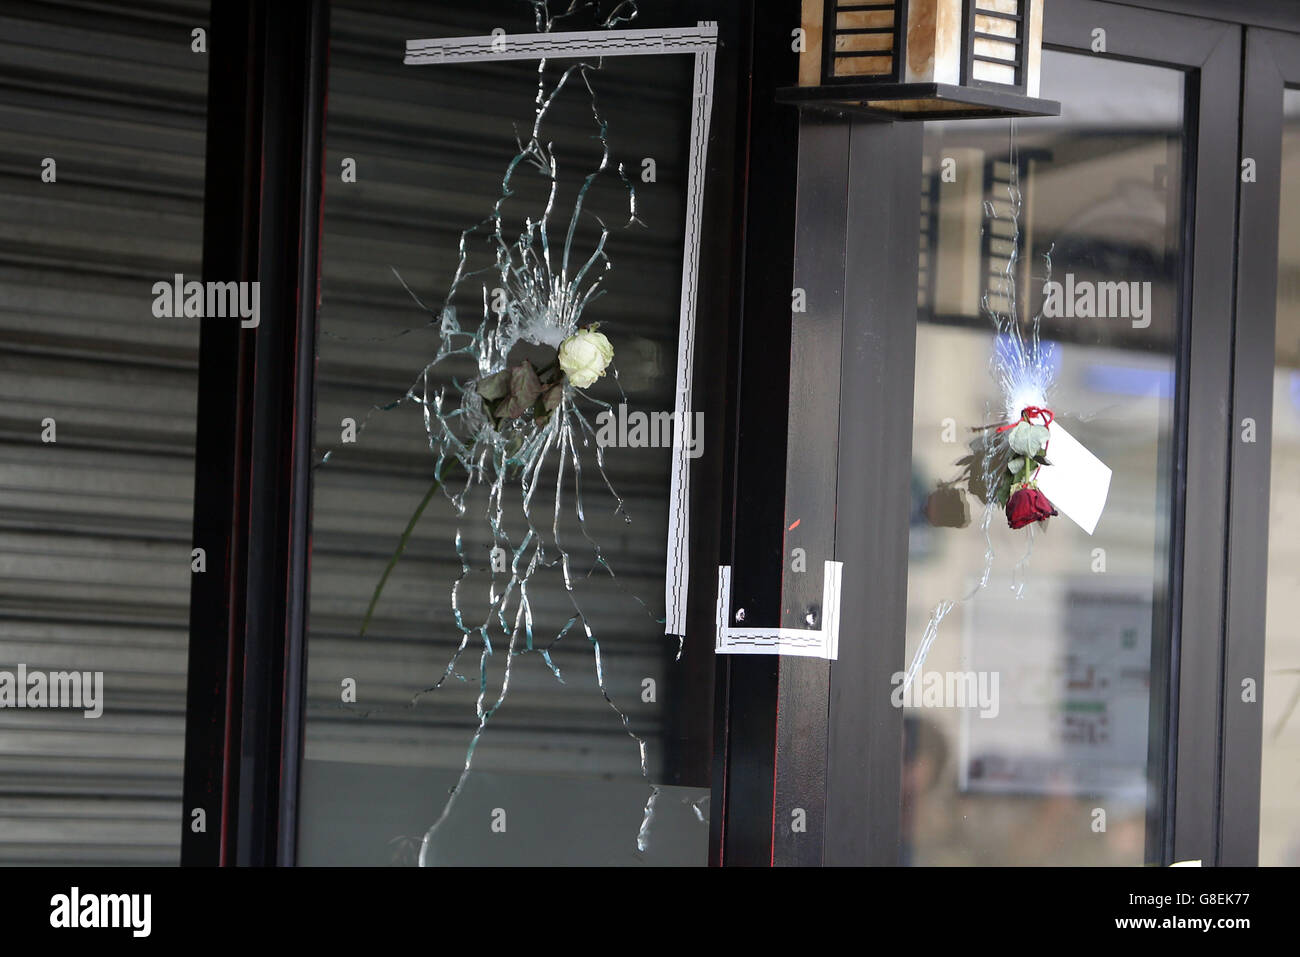 Floral tributes on the windows of La Belle Equipe bar in Paris, after terror attacks killed at least 129 people in the city on Friday. Stock Photo